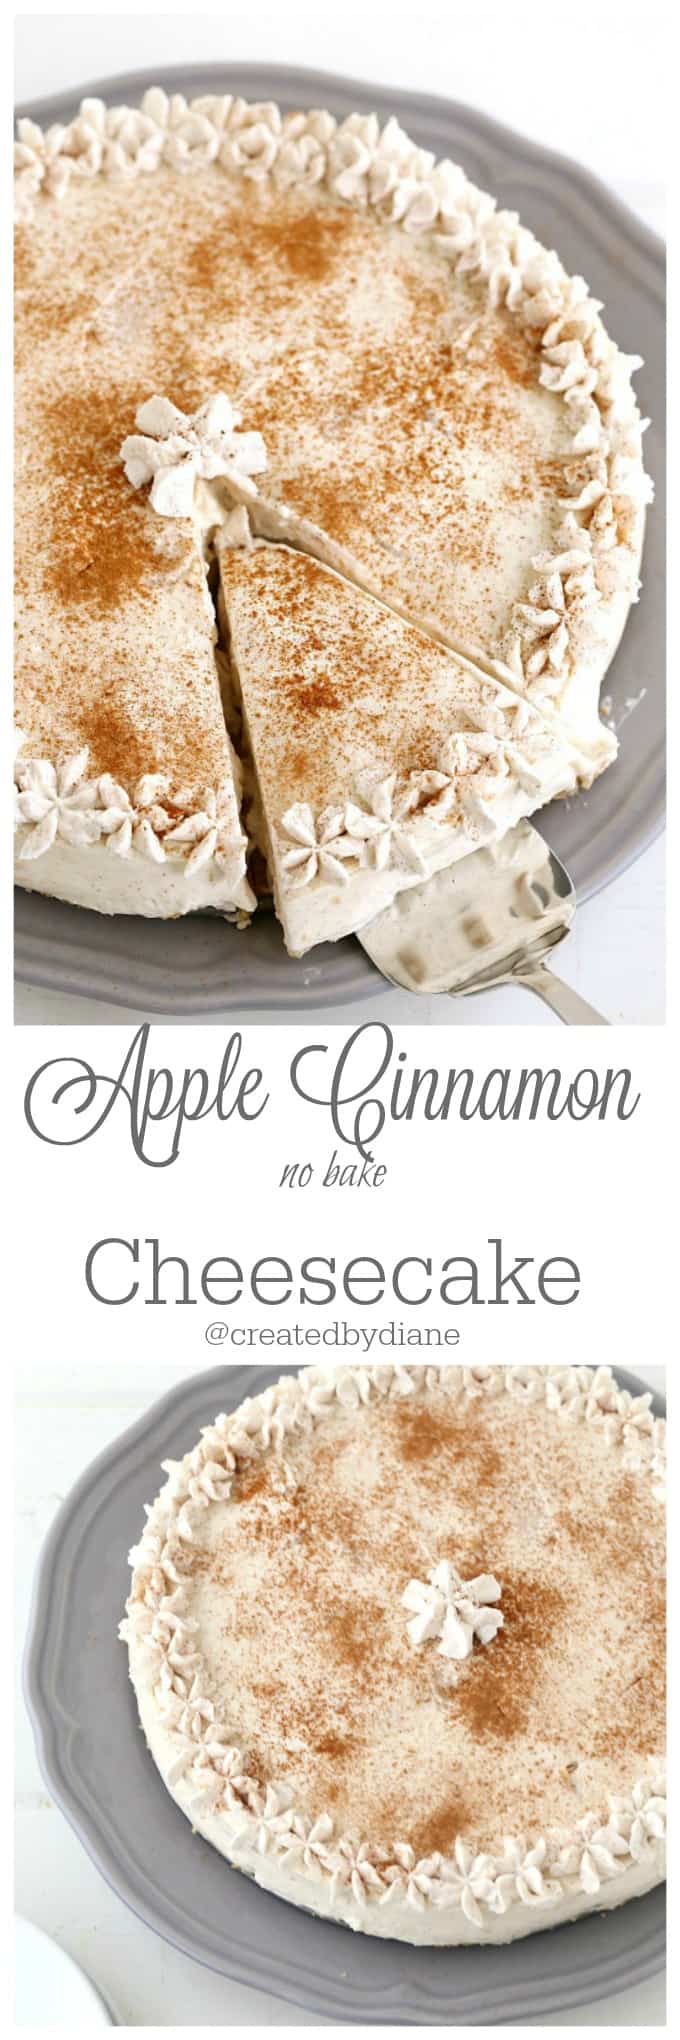 apple cinnamon no bake cheesecake is delicious and easy to make @createdbydiane